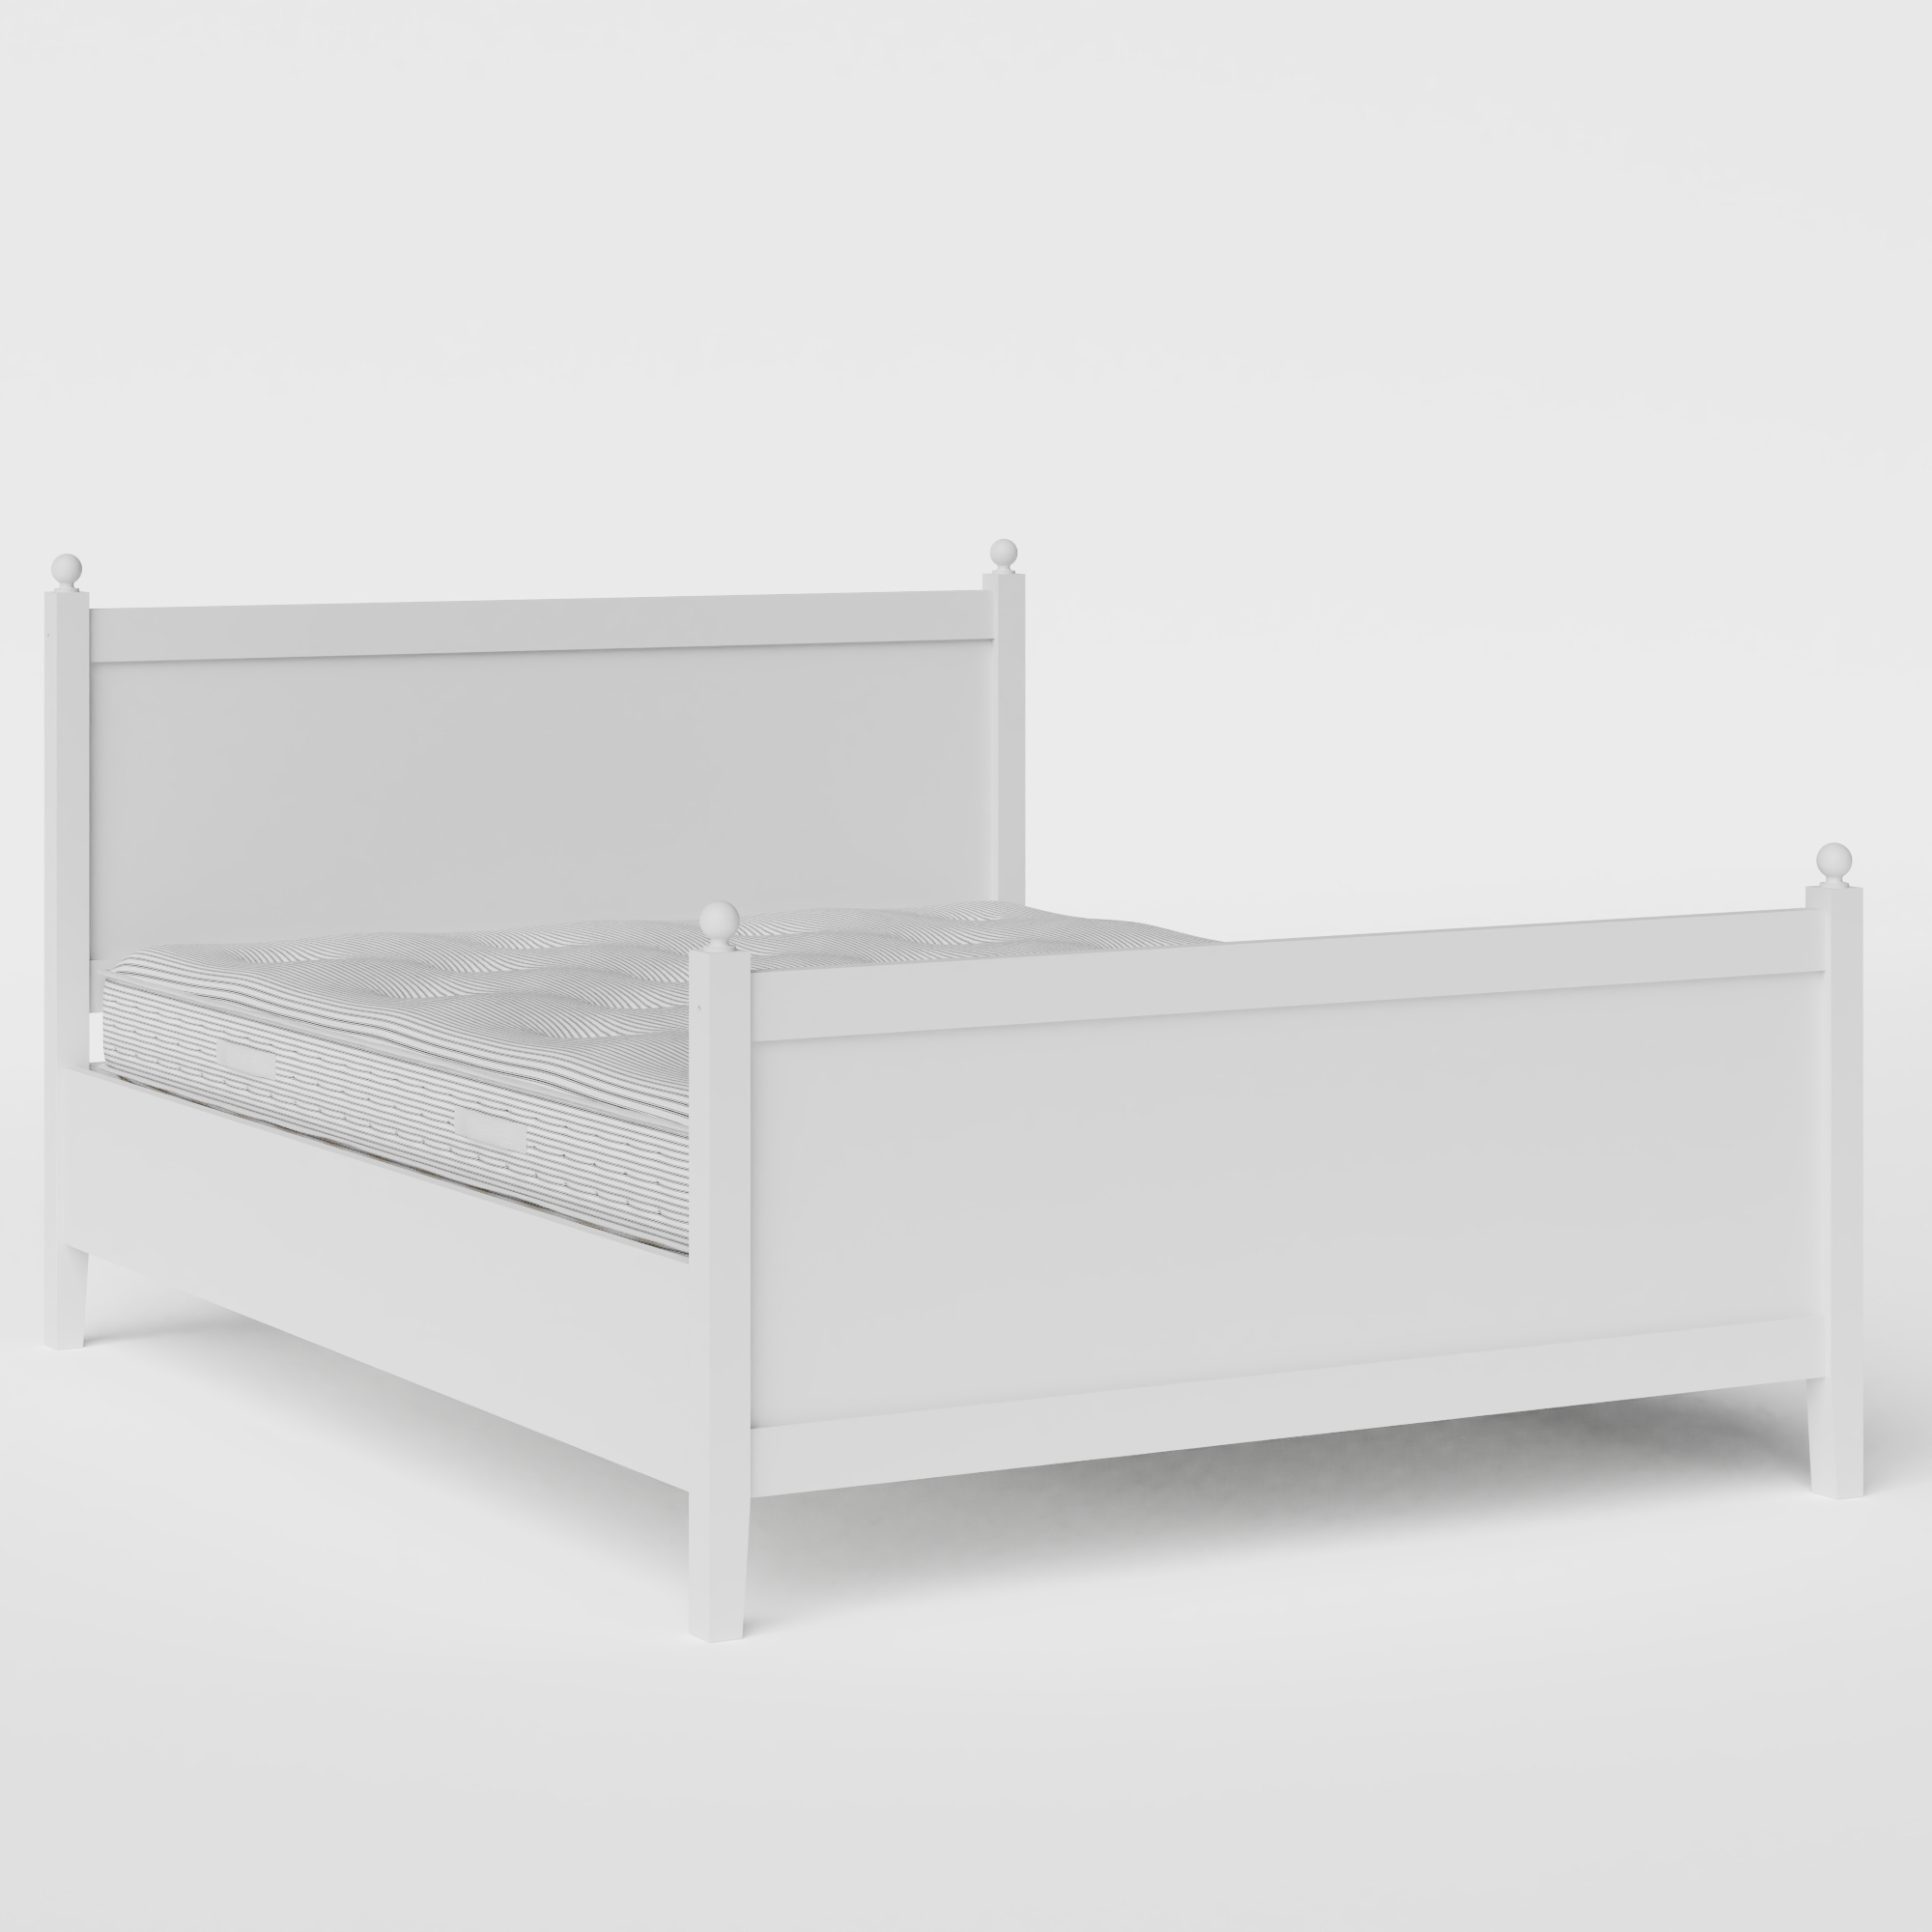 Marbella Painted painted wood bed in white with Juno mattress